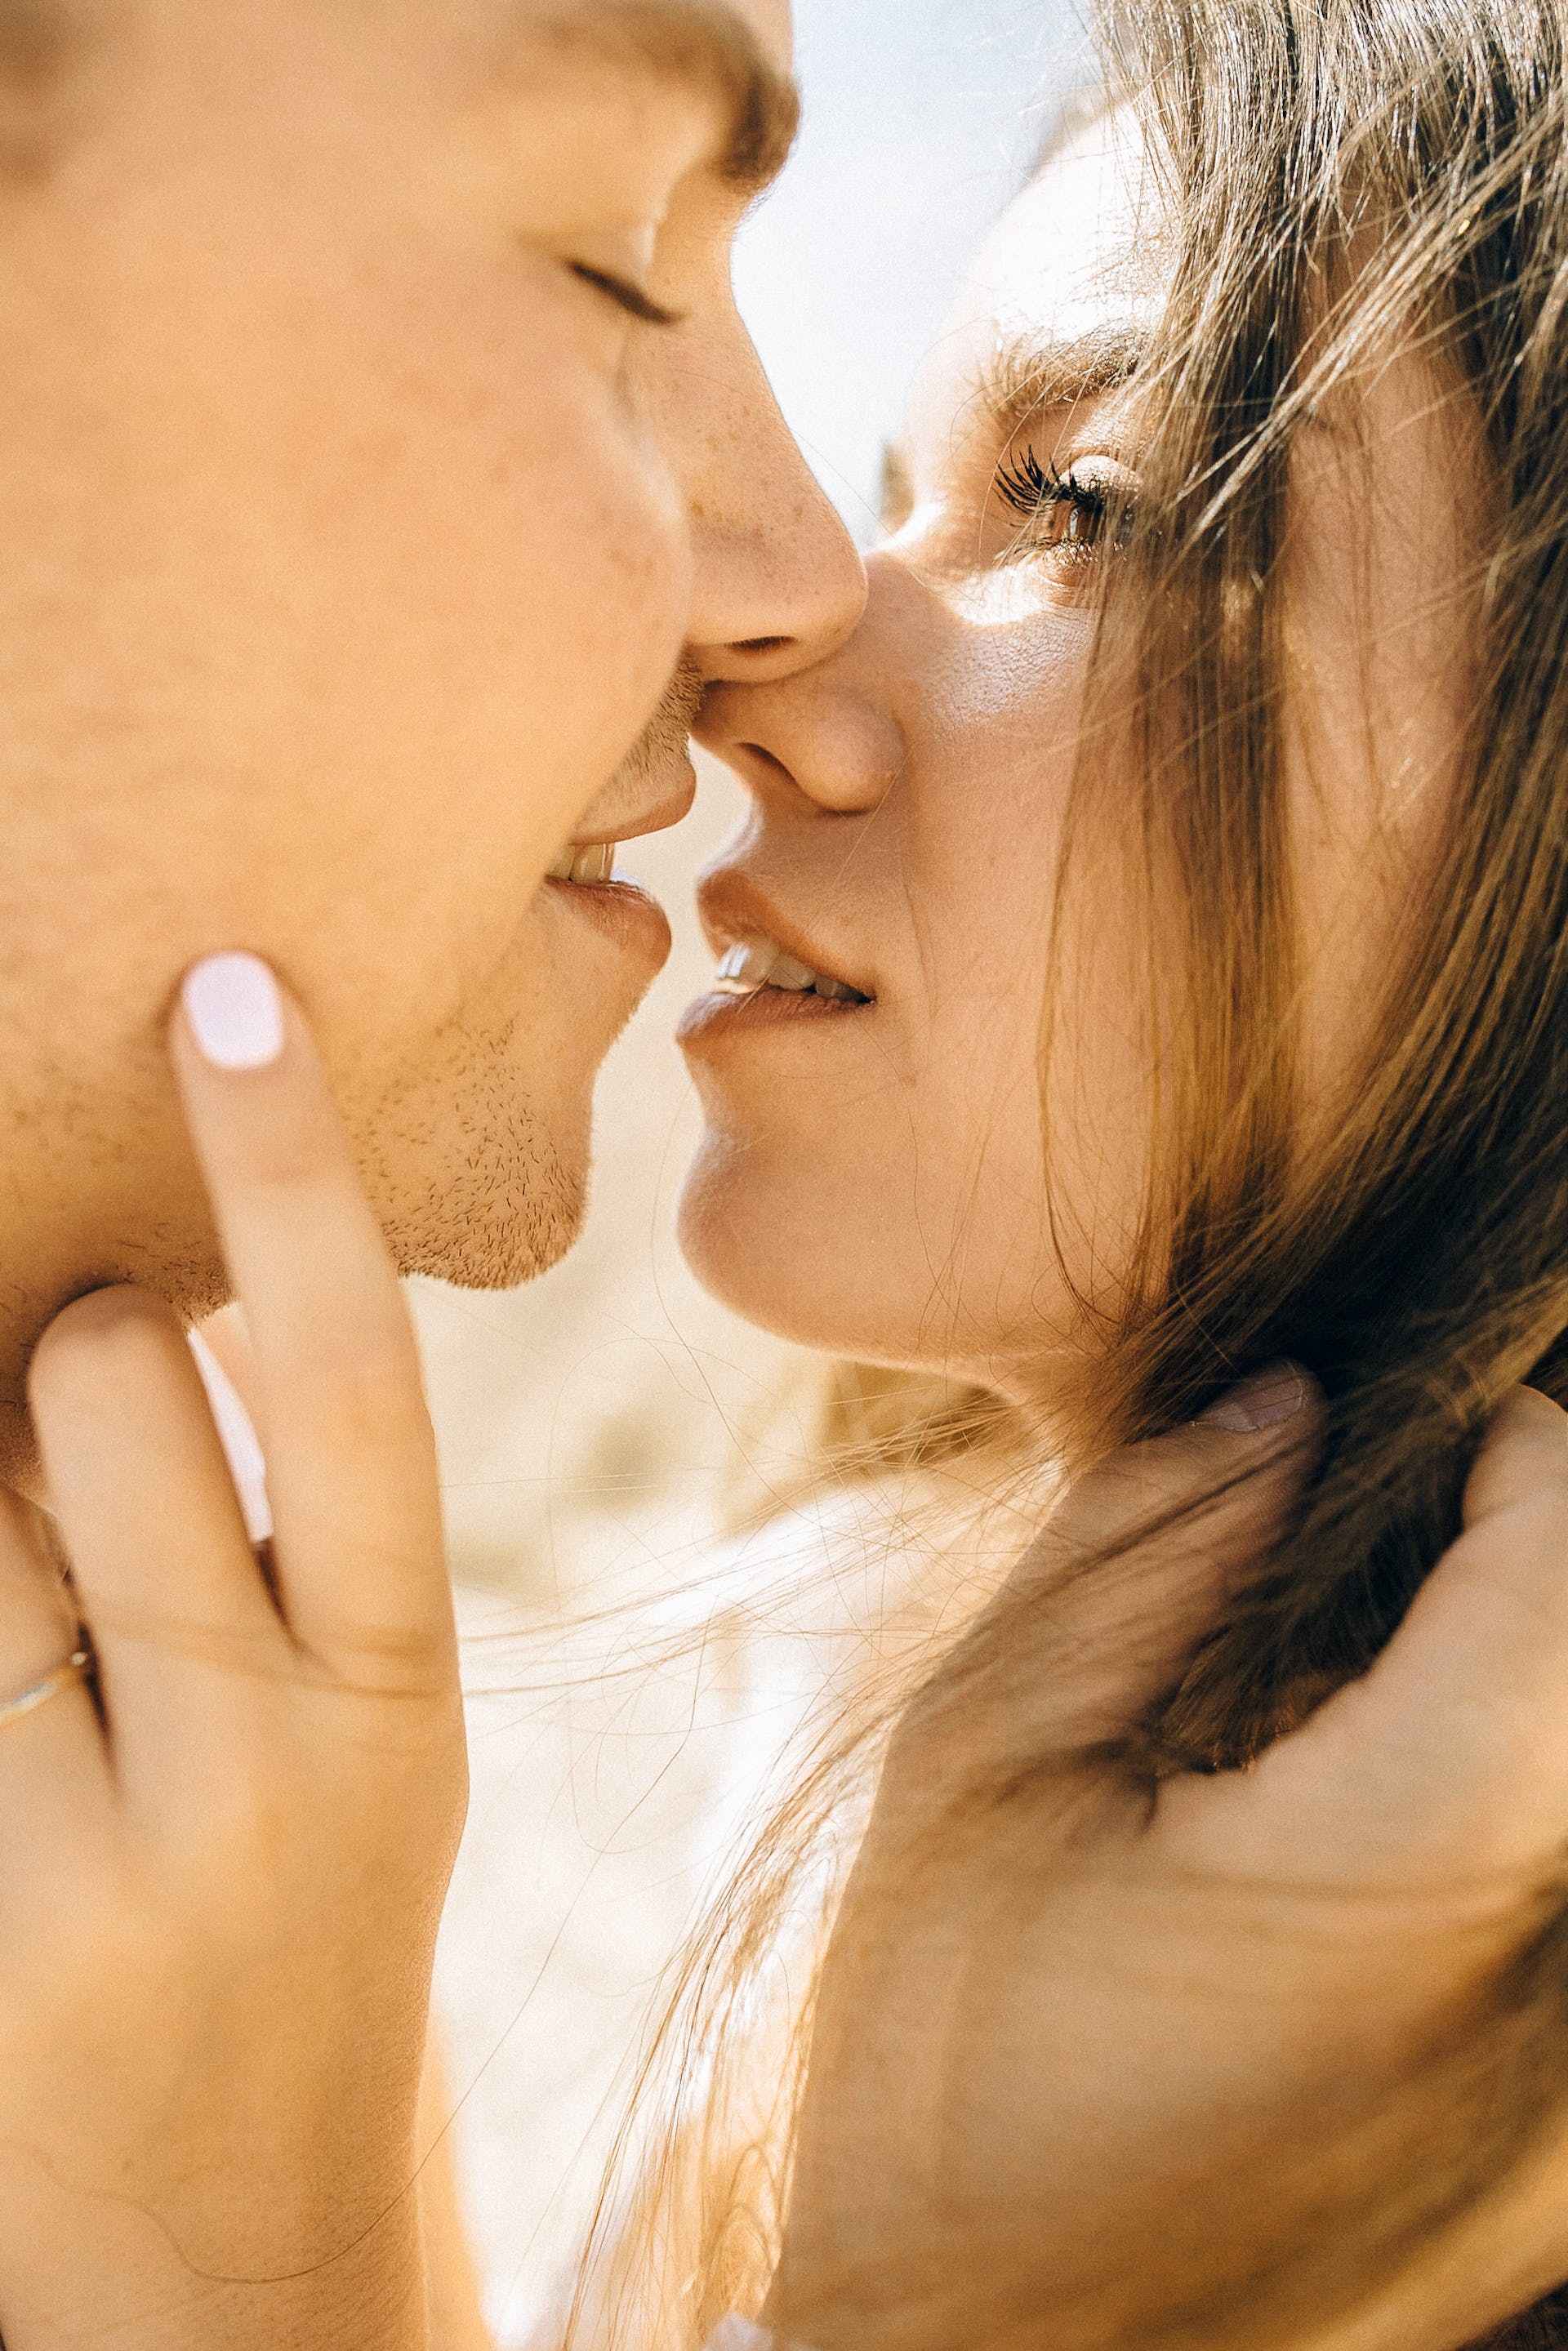 A couple shares a tender moment | Source: Pexels